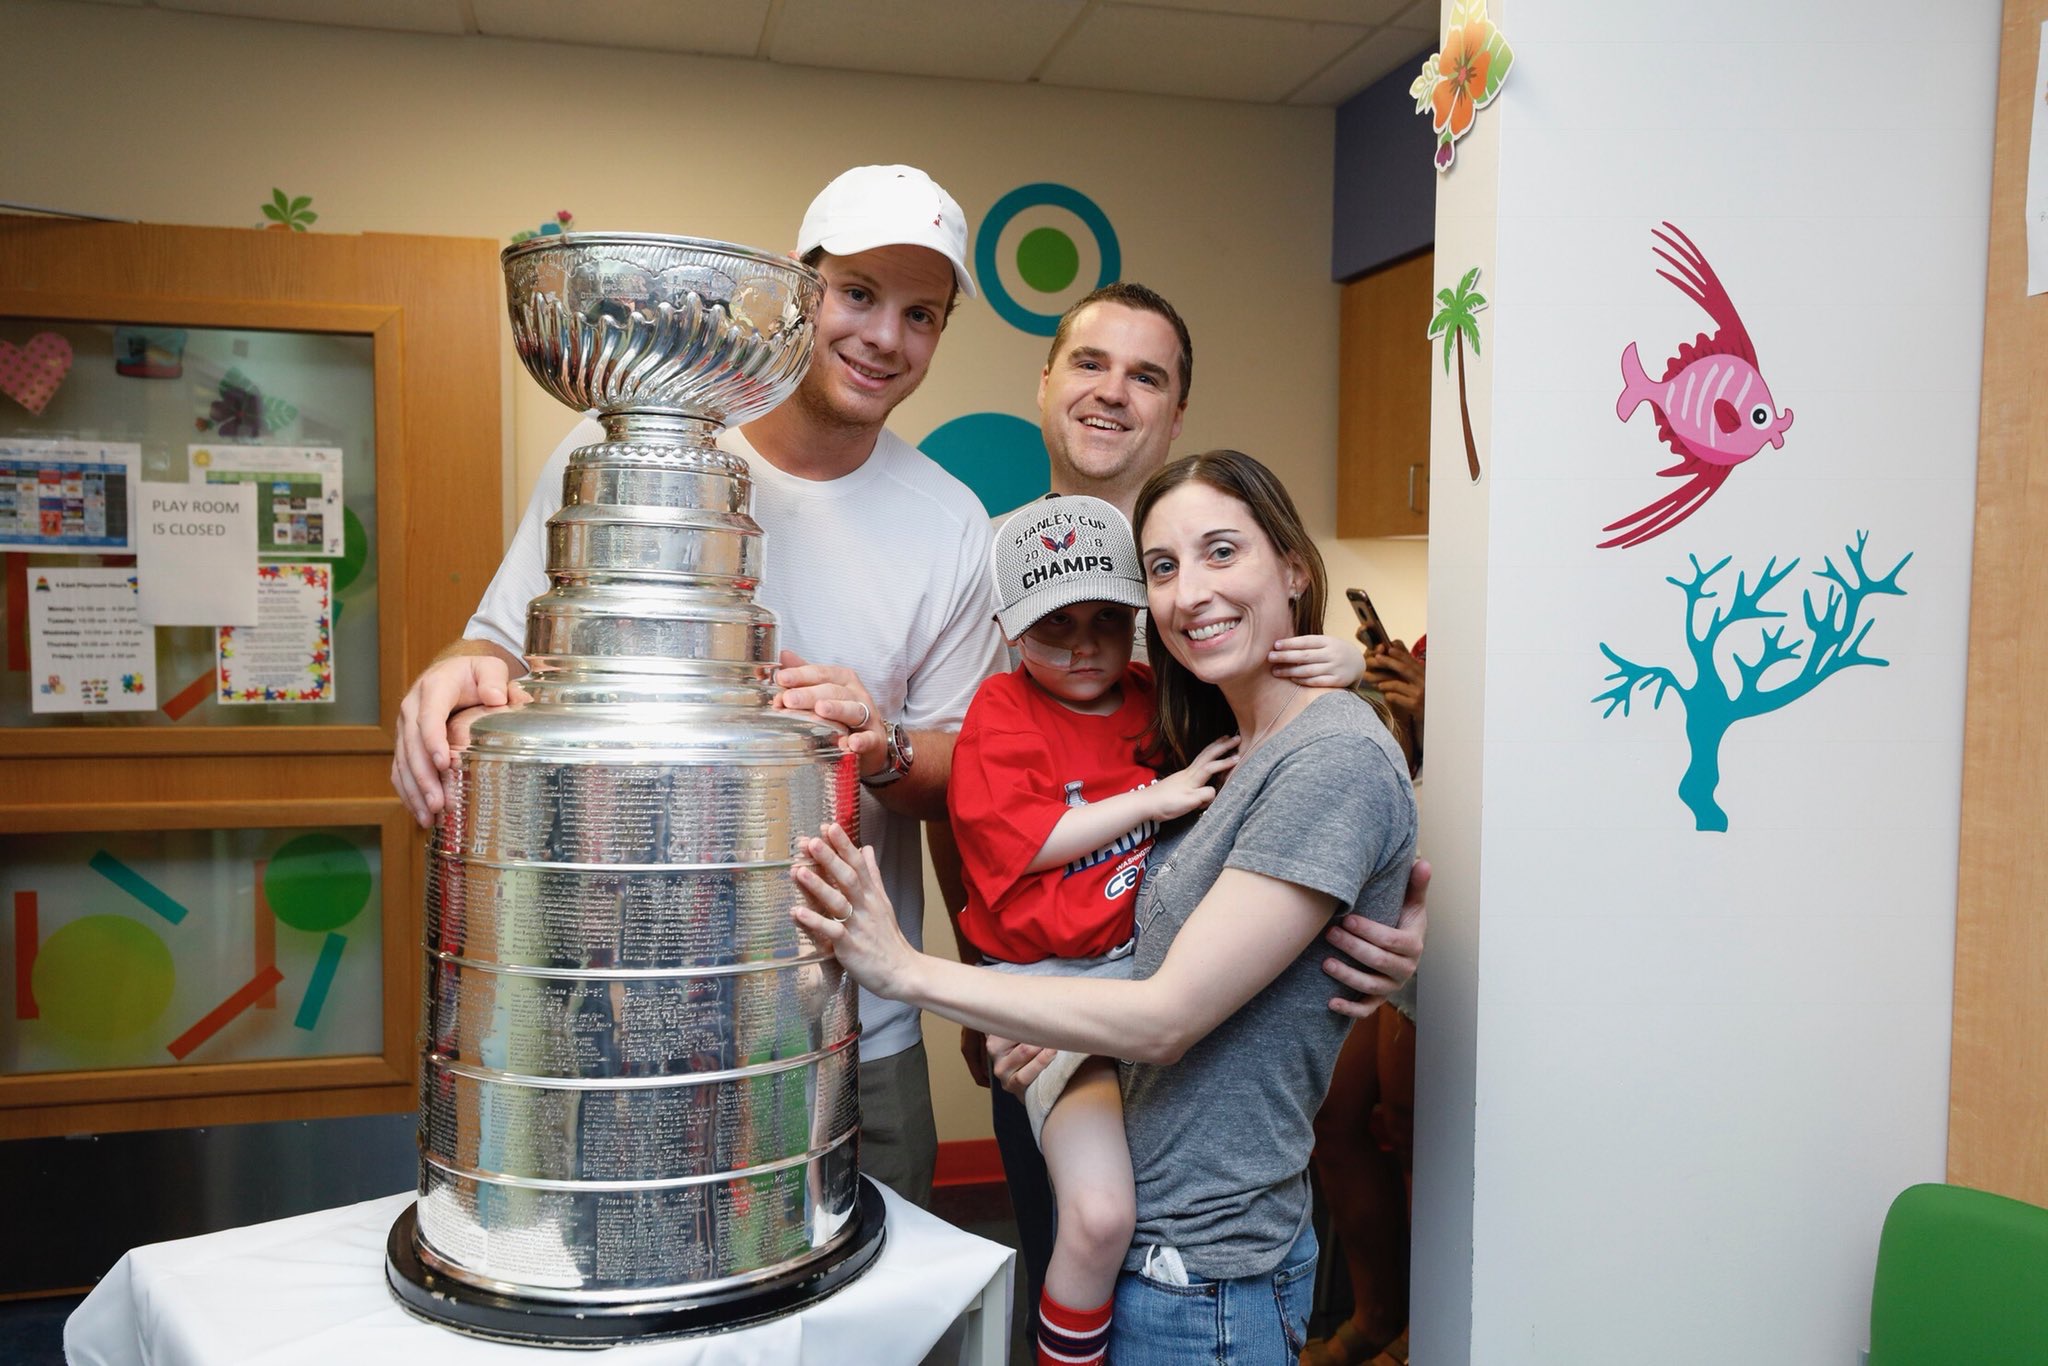 Stanley Cup raises spirits at South Shore Hospital